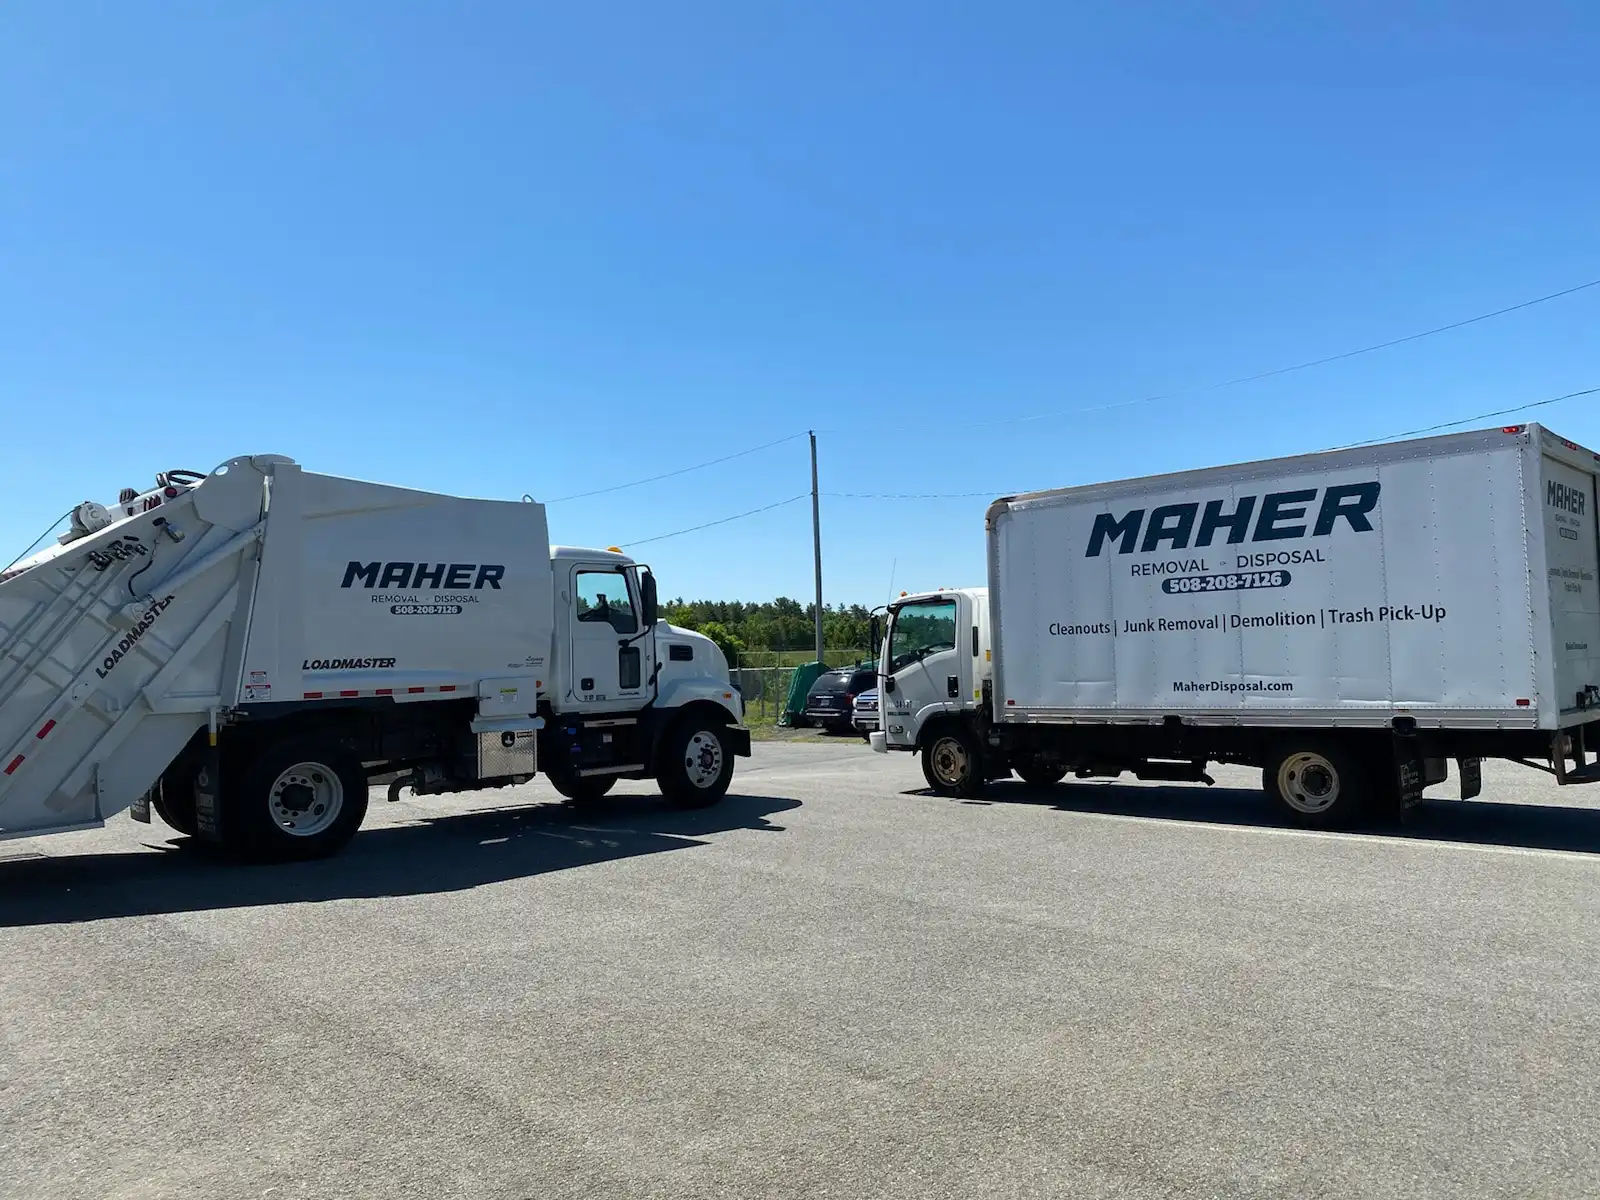 Maher Removal & Disposal is a Trash Pickup & Junk Removal company in Rockland, MA